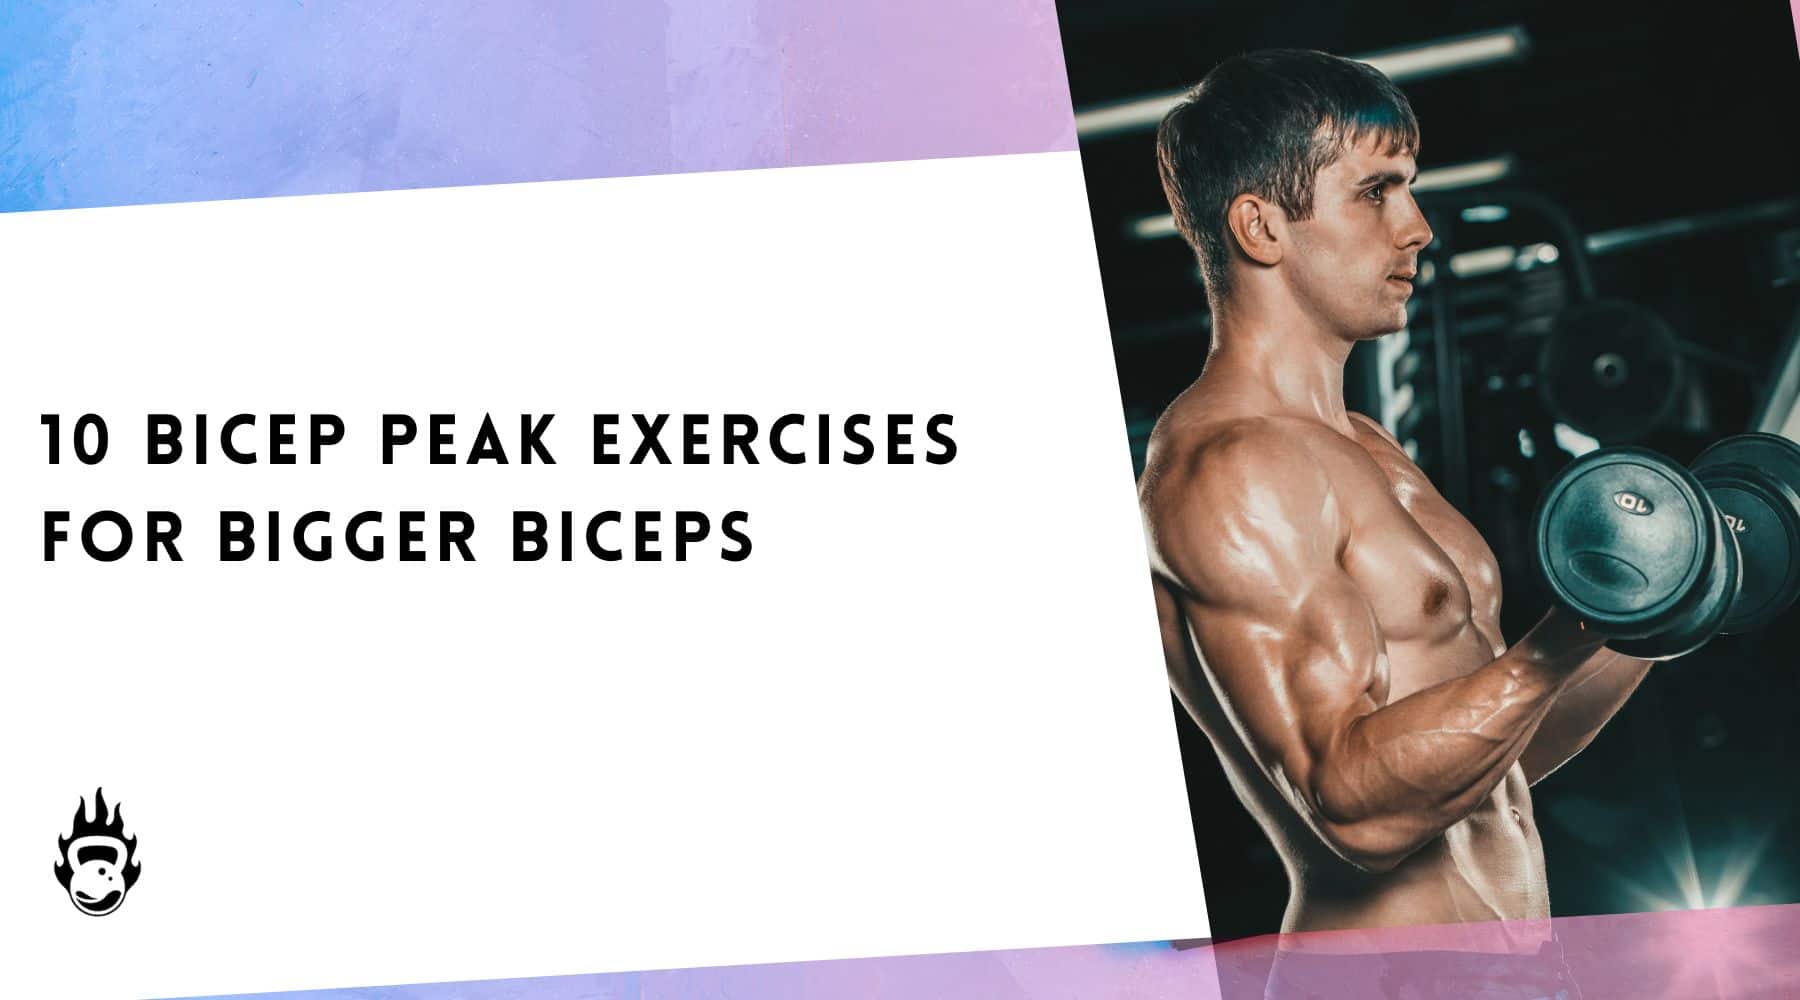 5 Exercises for Building Balanced Biceps